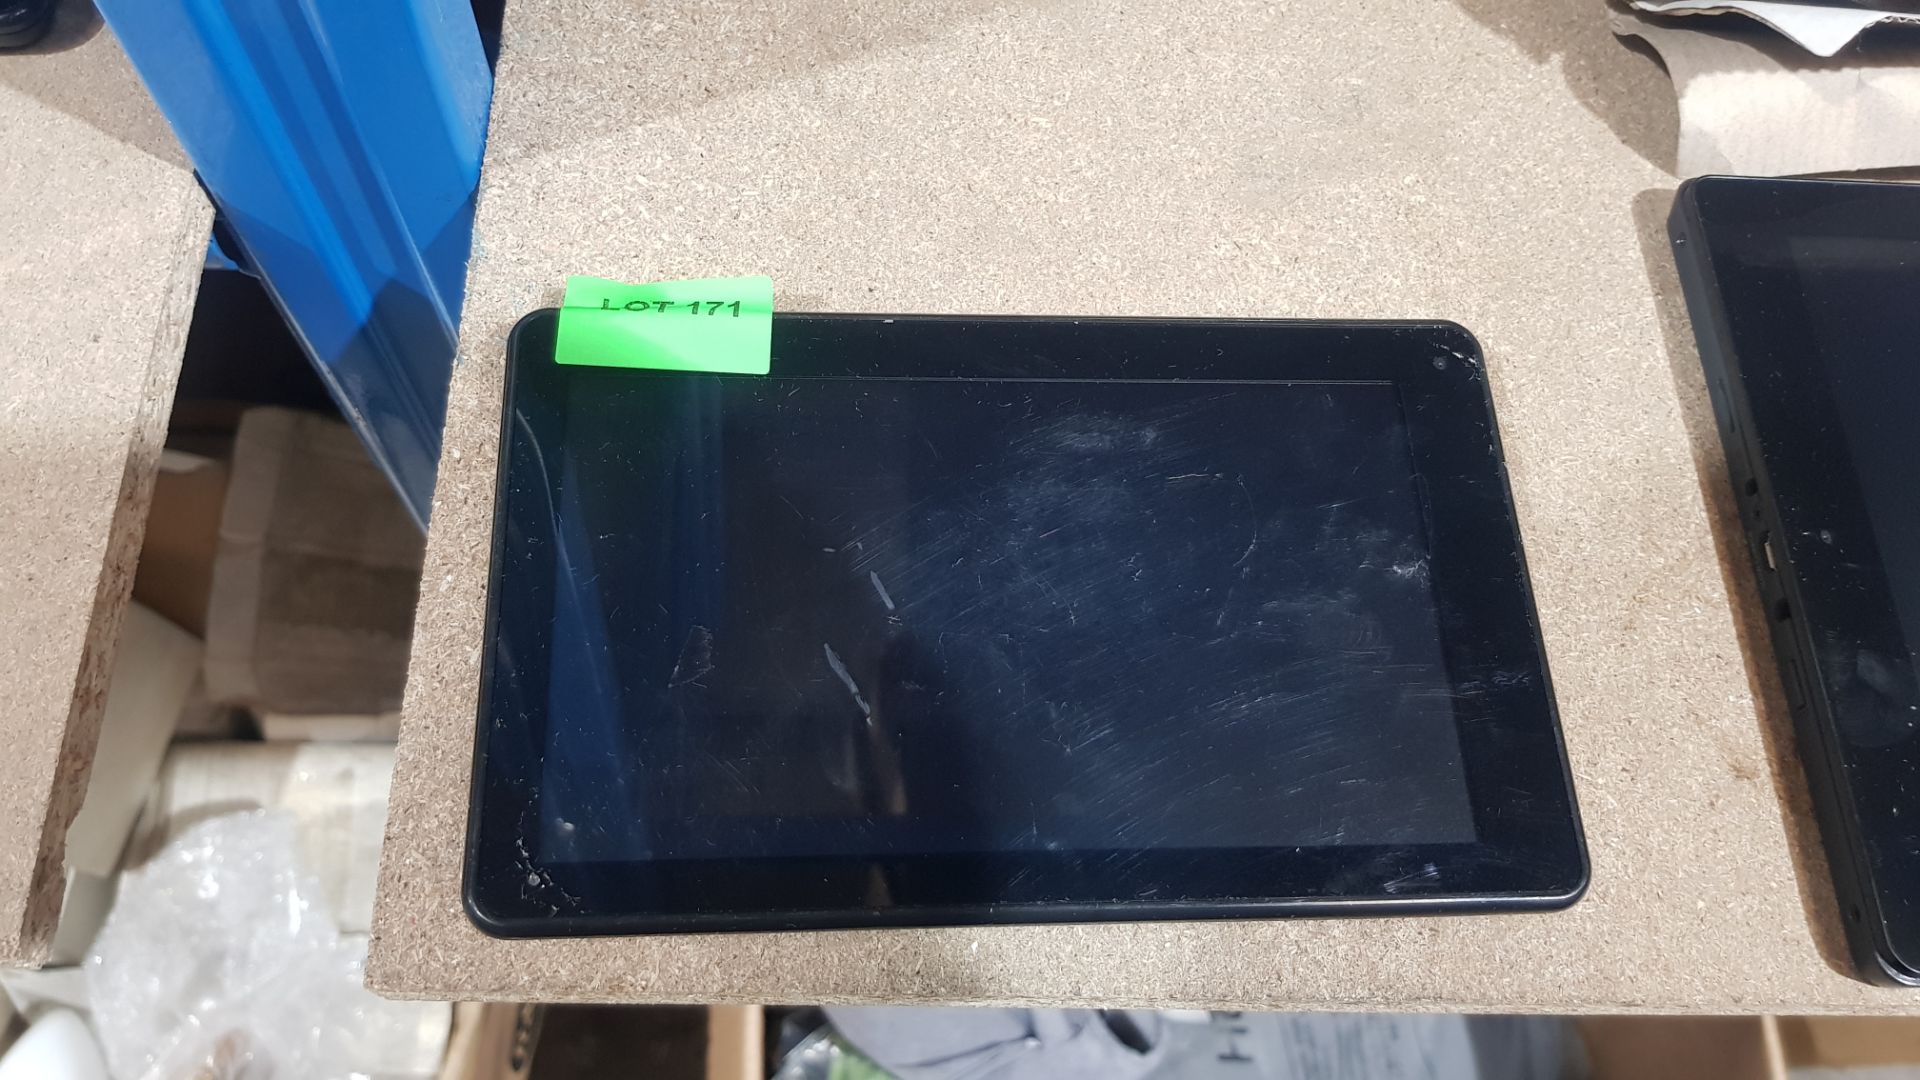 (R9K) Tech. 1 X RCA Aura 7 Tablet. Factory Reset Applied. Requires Micro USB Cable. - Image 2 of 3